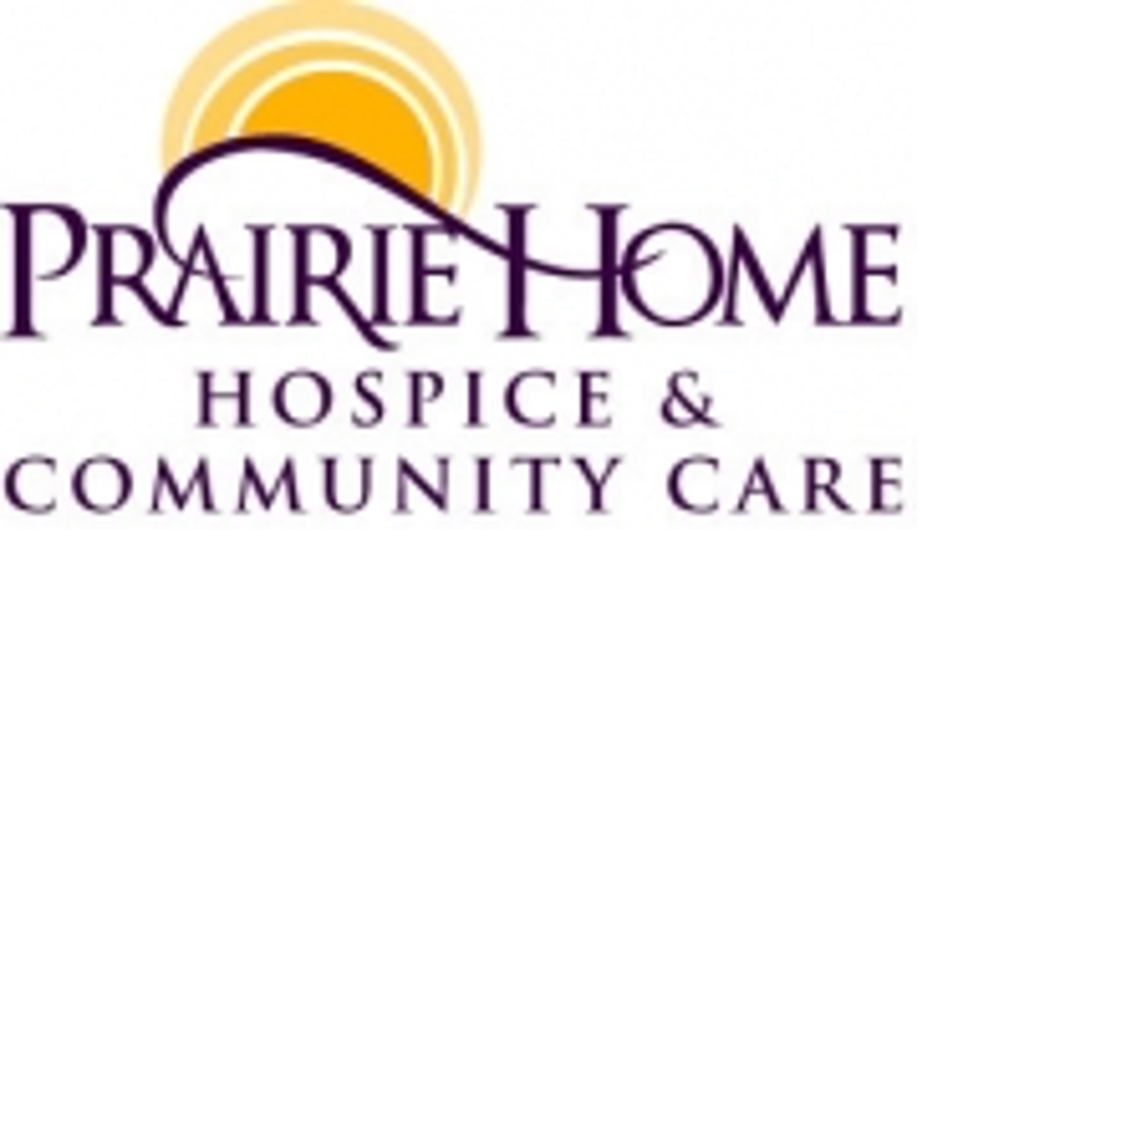 Prairie Home Hospice & Community Care GiveMN